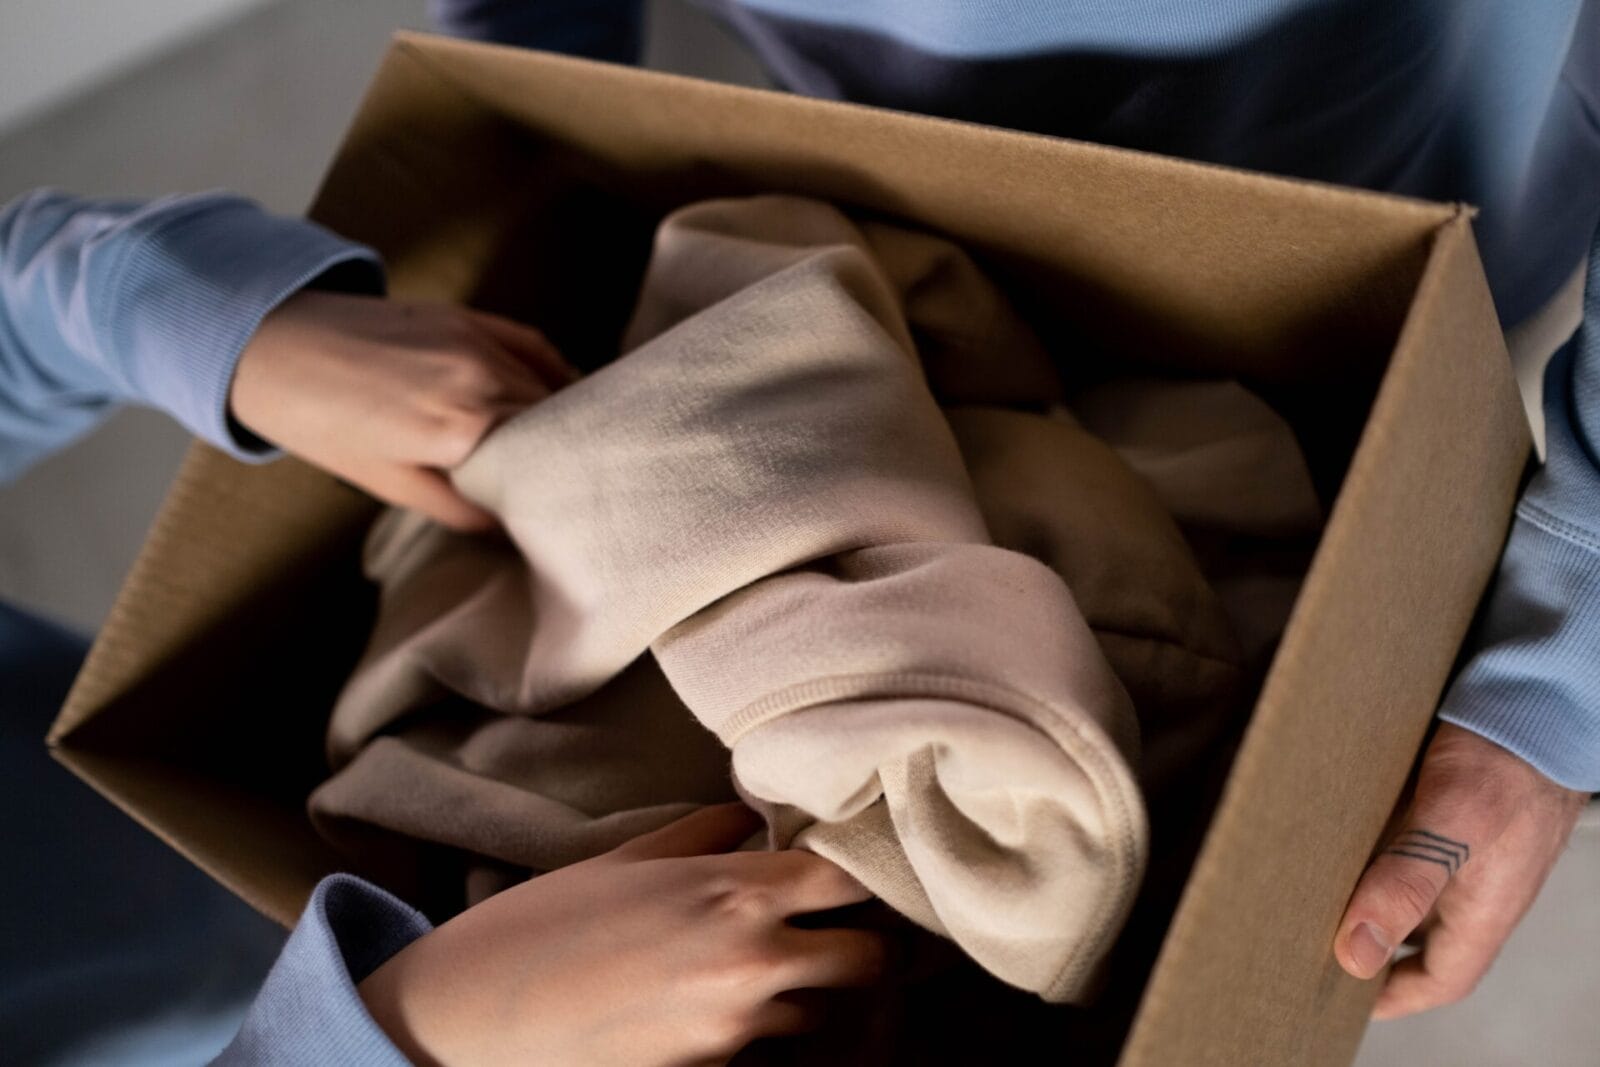 Hands dropping clothing into a cardboard box.